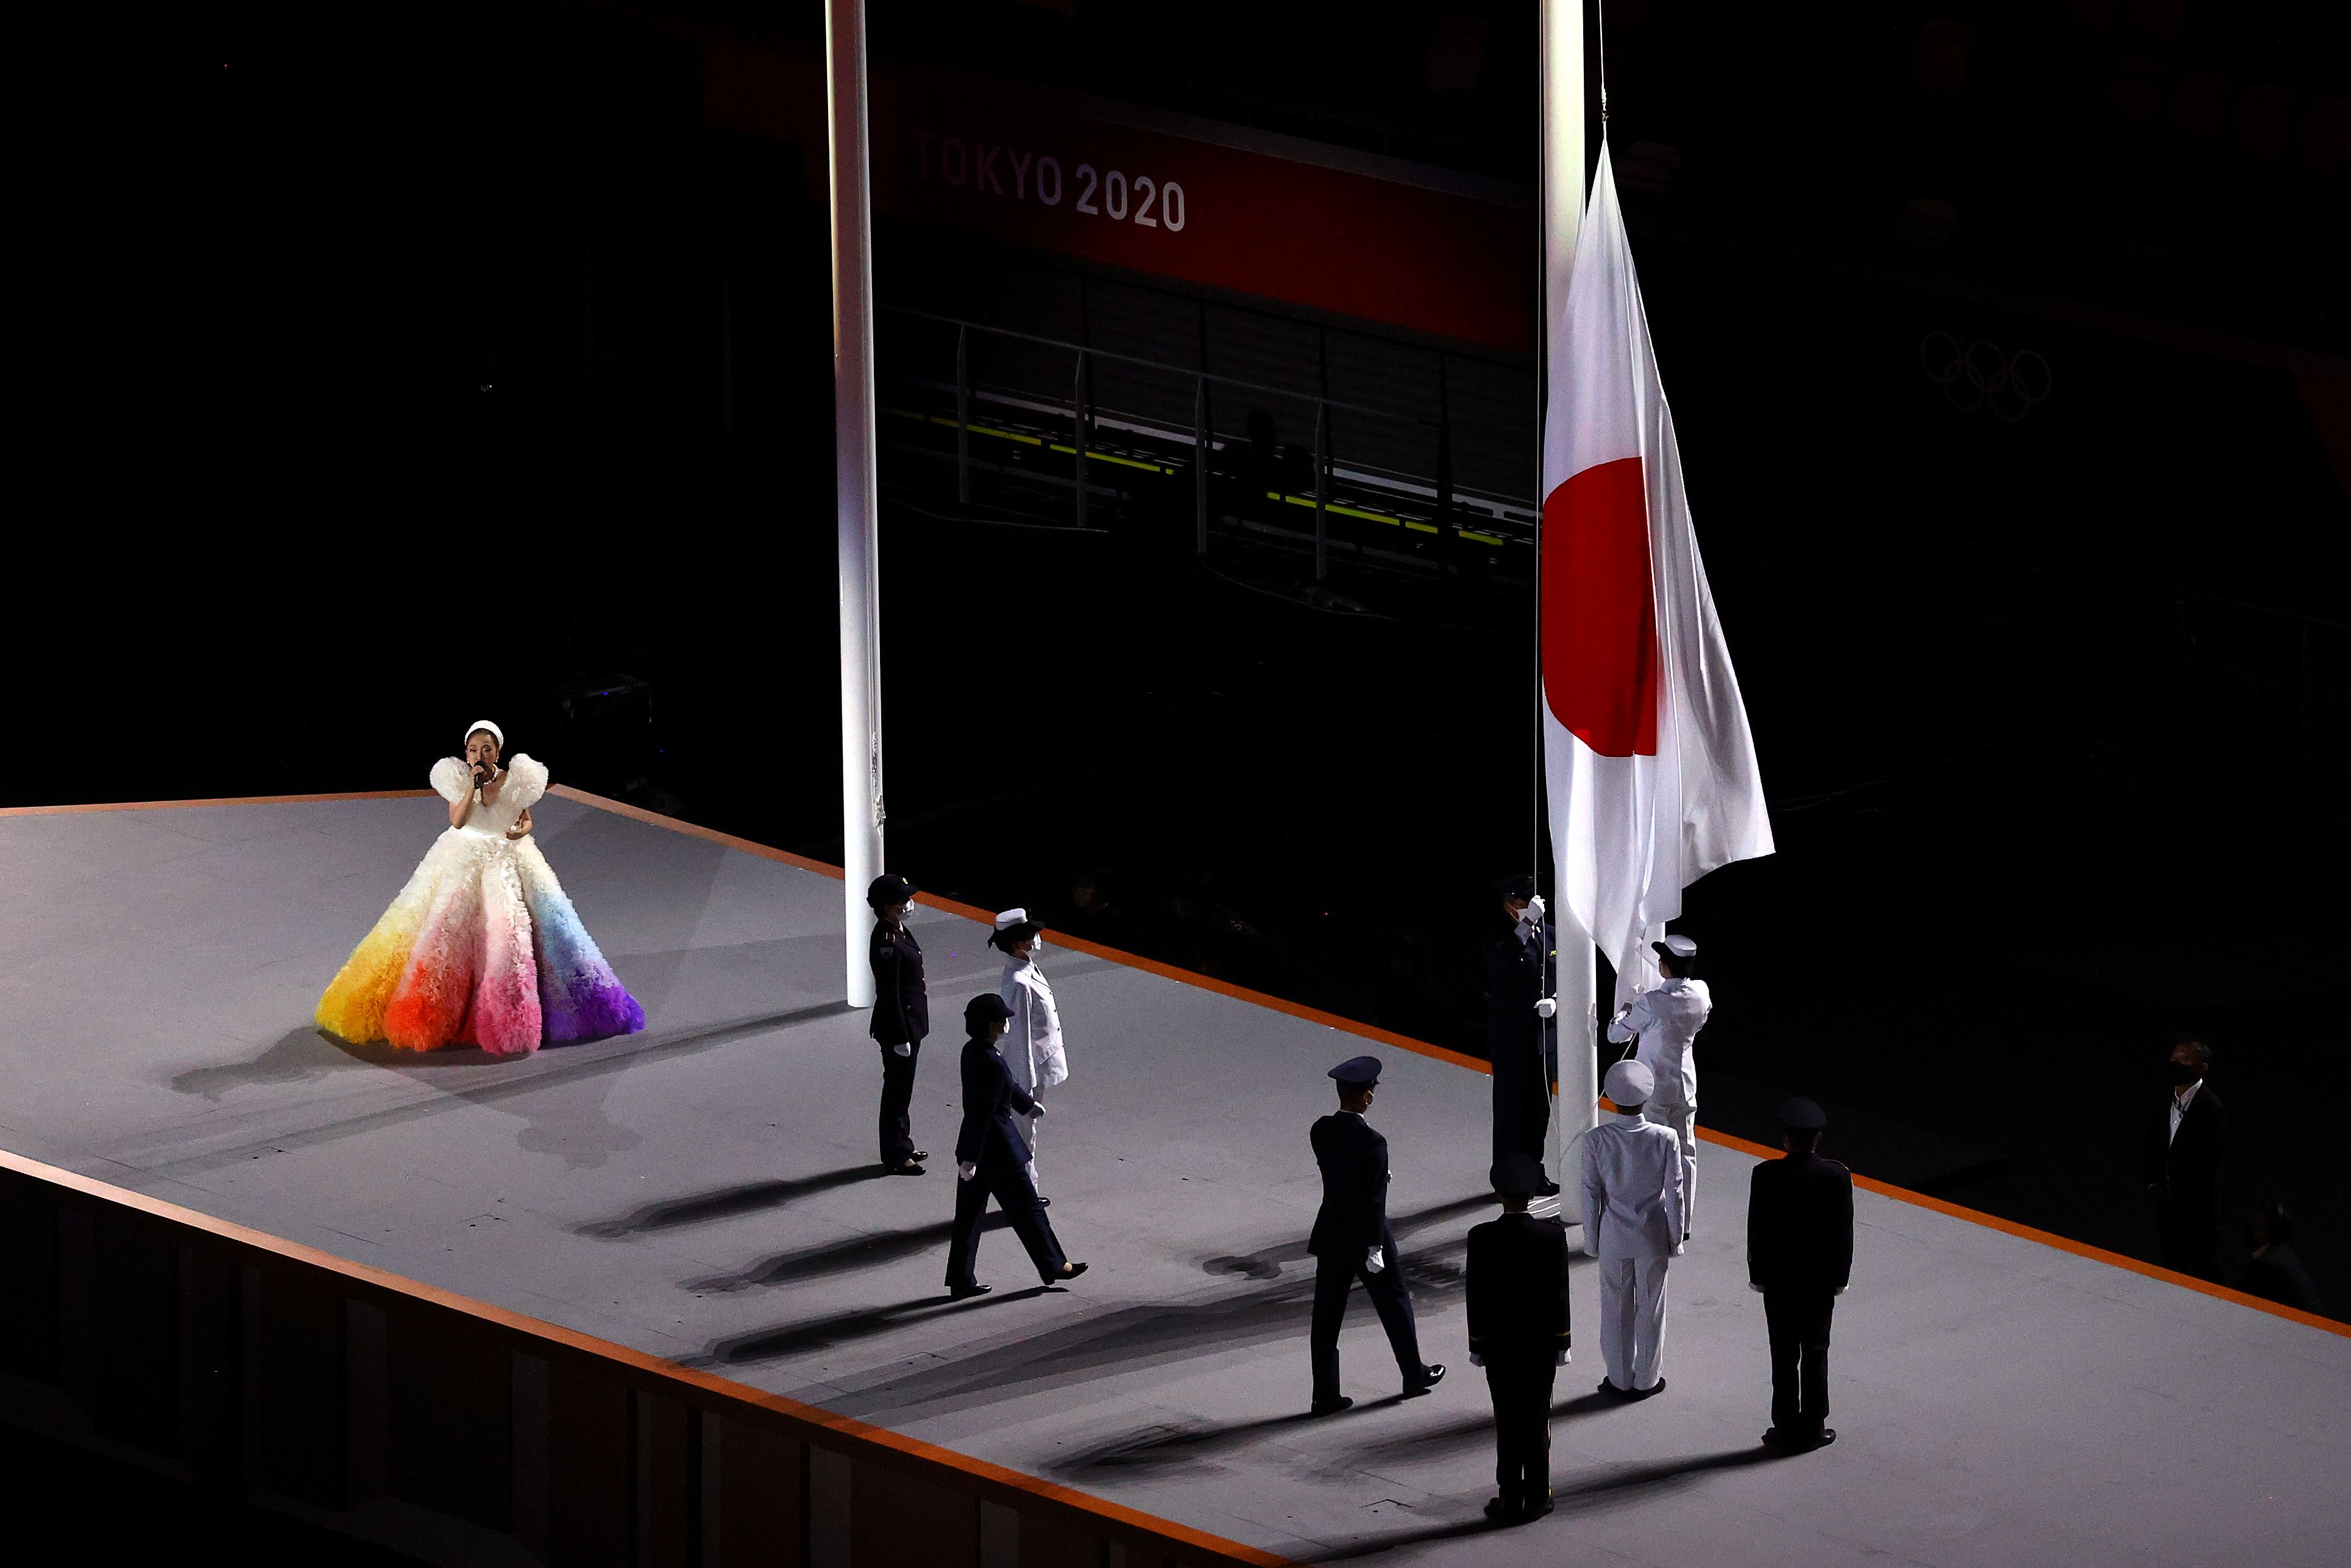 PICTURE of Japanese flag being raised